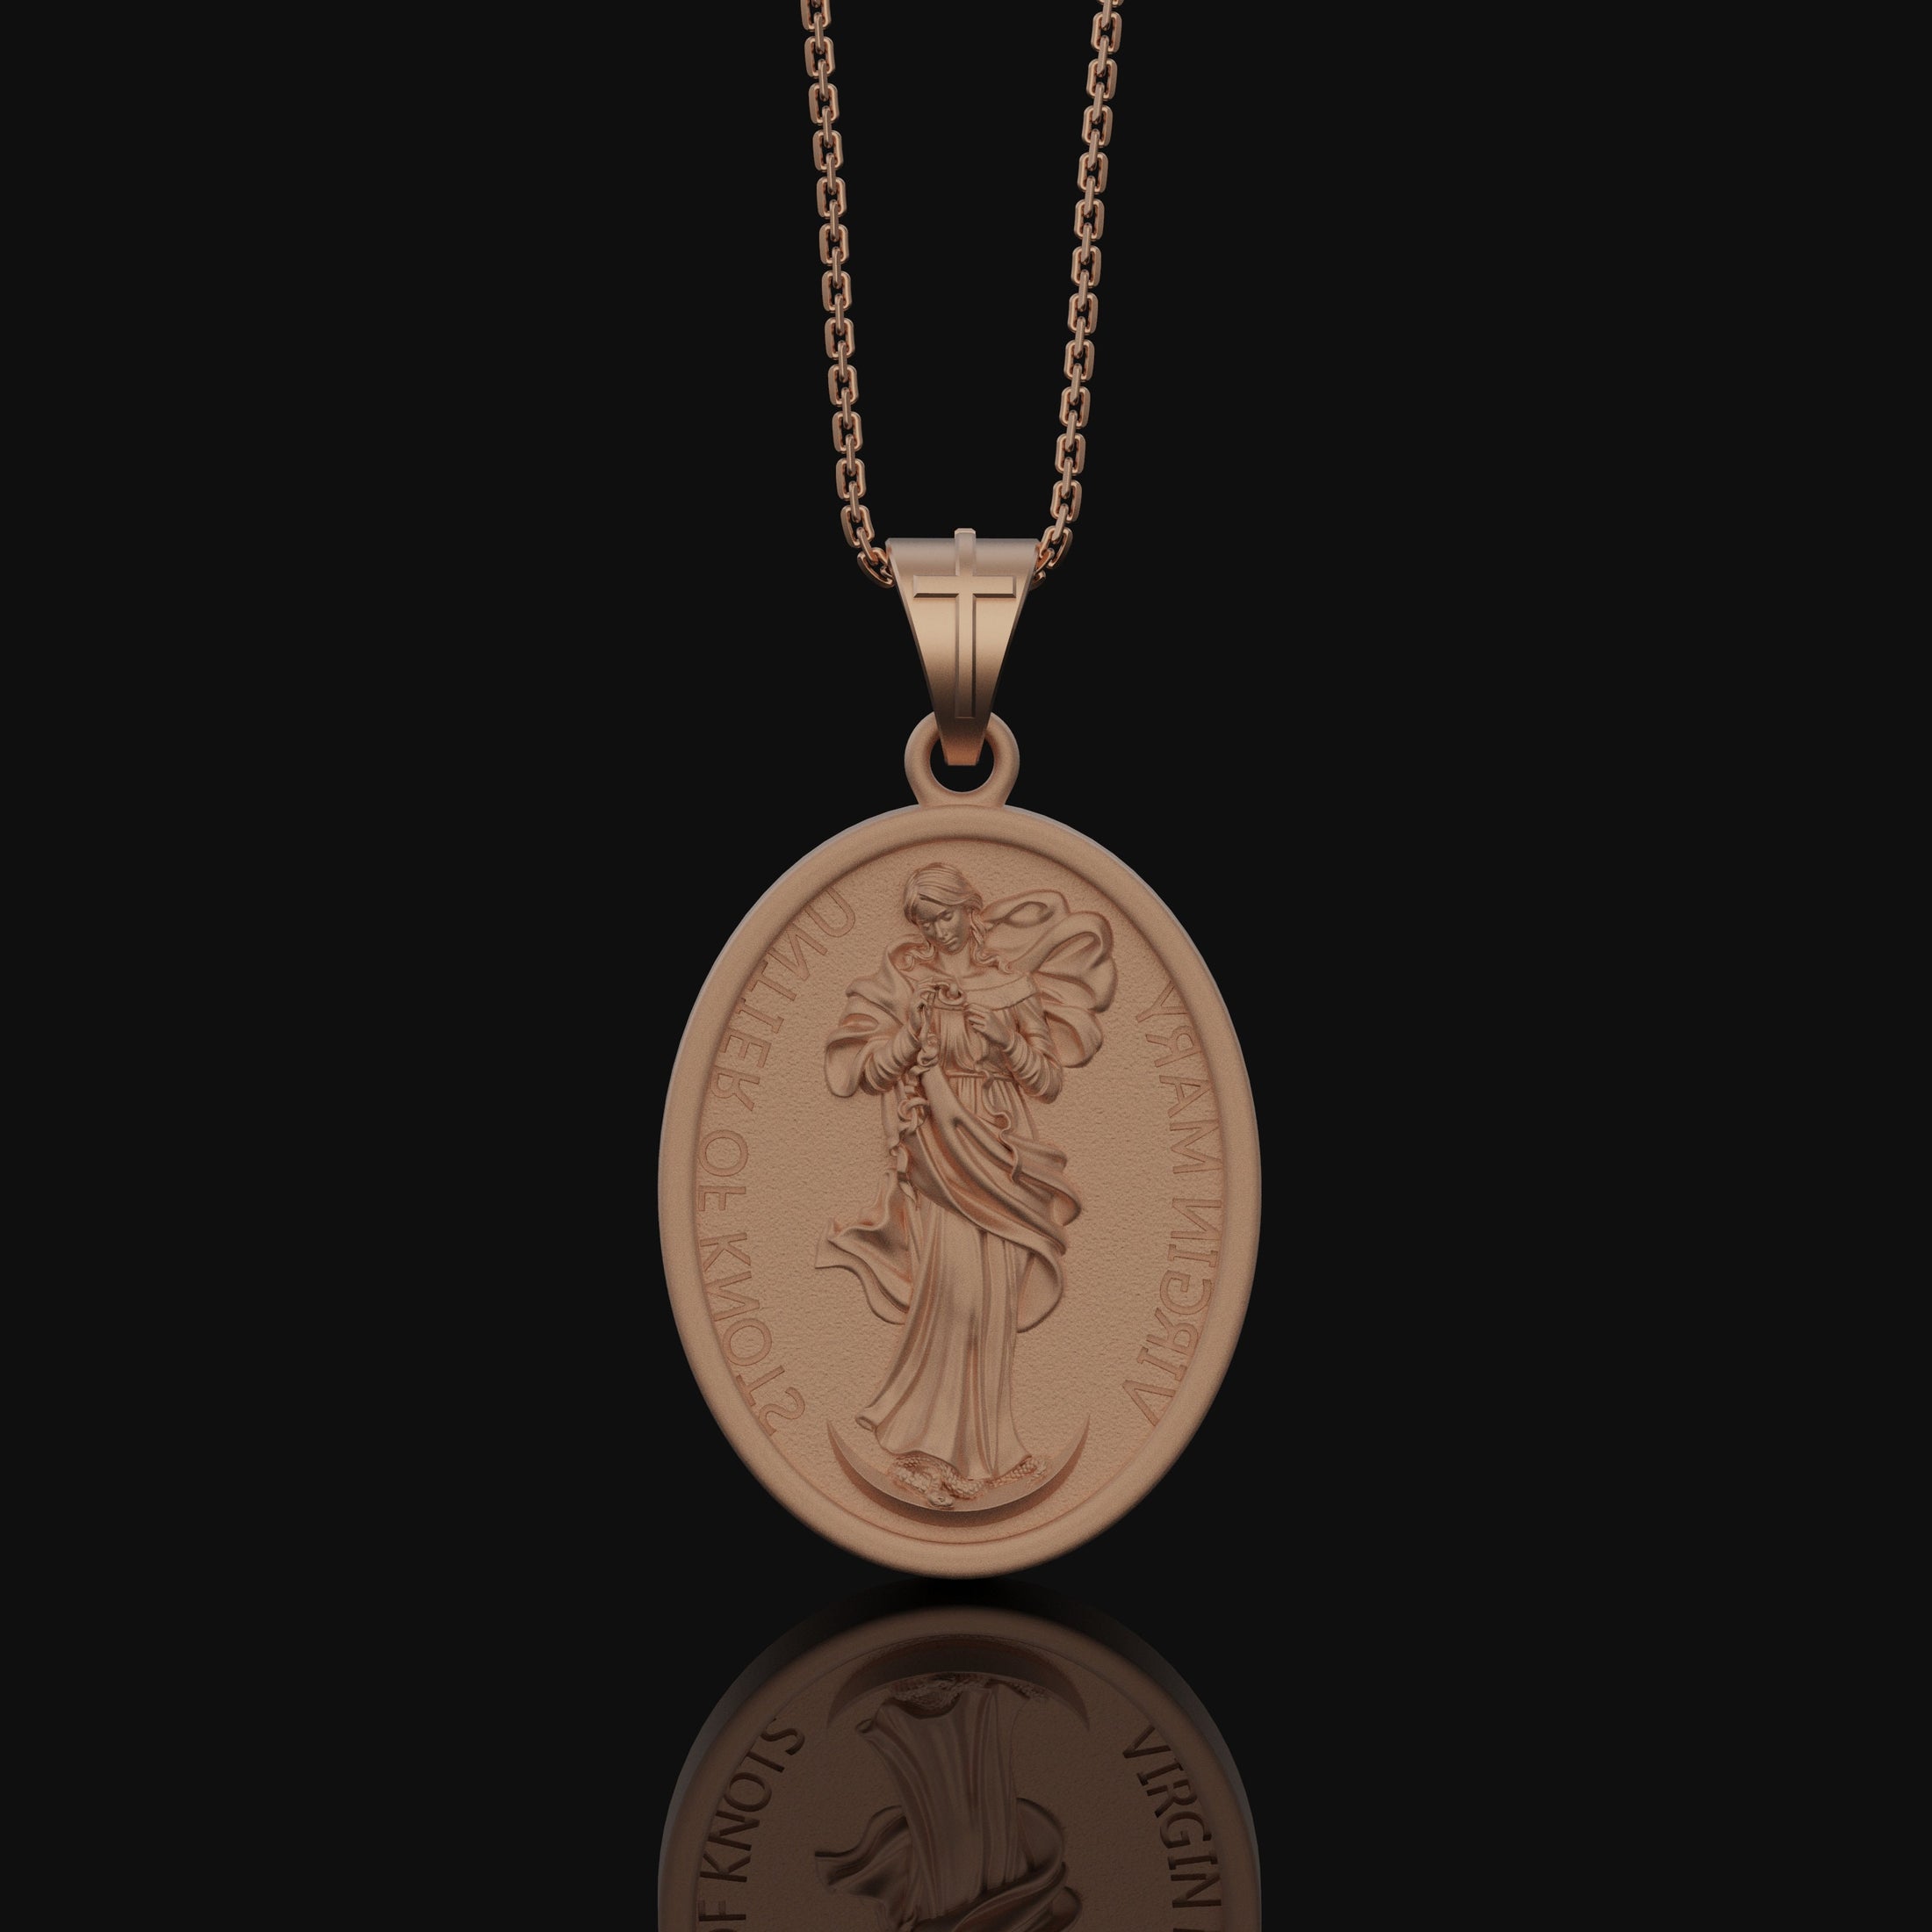 Mary Untier of Knots, Our Lady, Virgin Mary Medal, Virgin Mary, Catholic Gift, Catholic Medals, Confirmation Gift, Christian Jewelry Rose Gold Matte